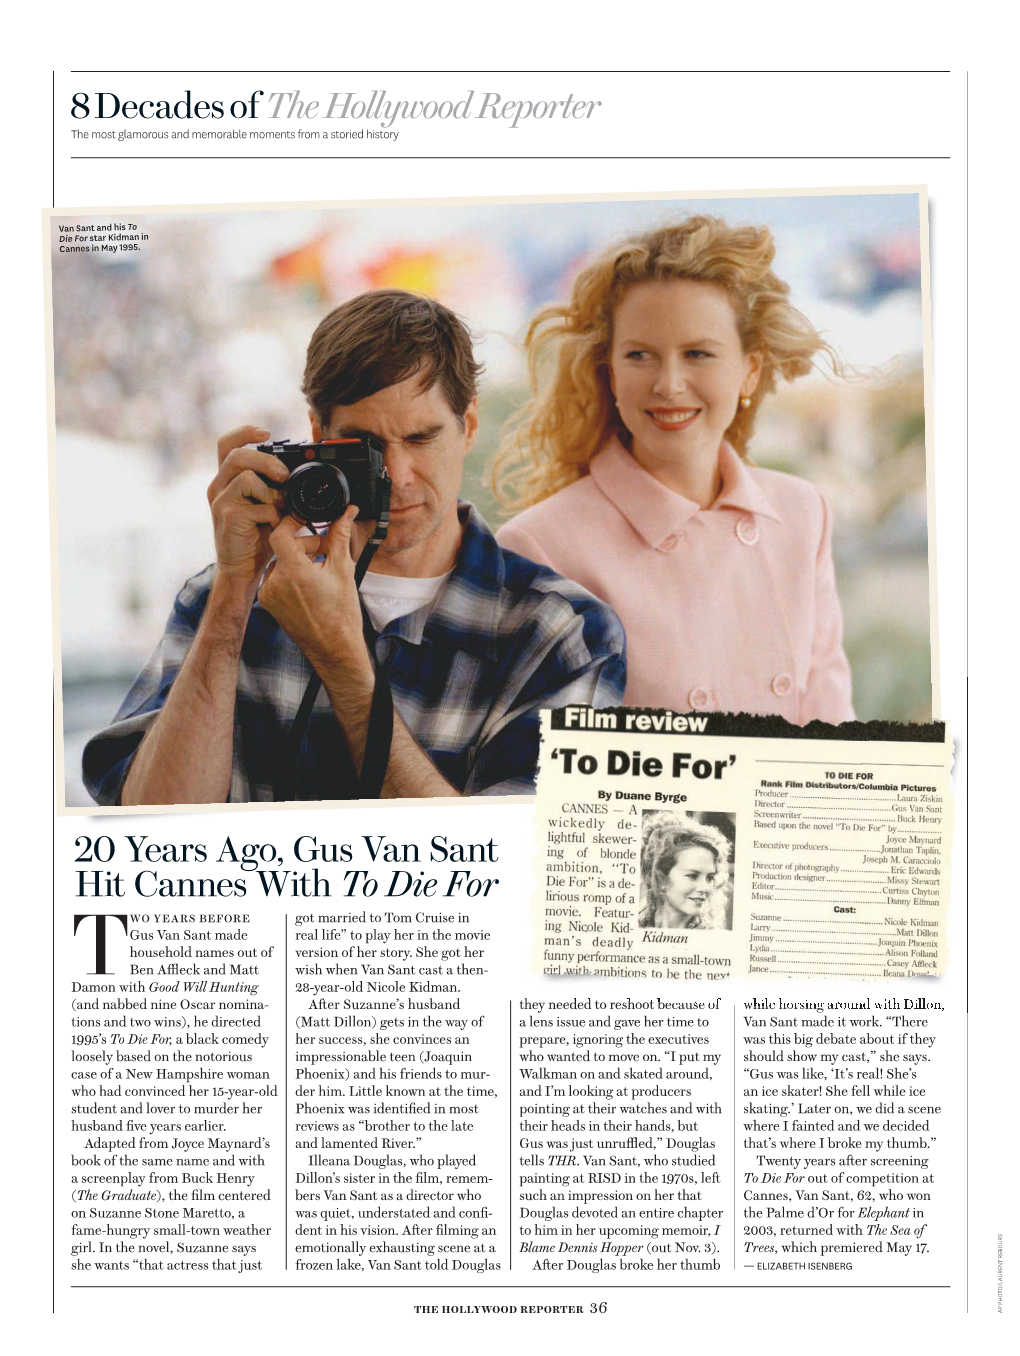 20 Years Ago, Gus Van Sant Hit Cannes with To